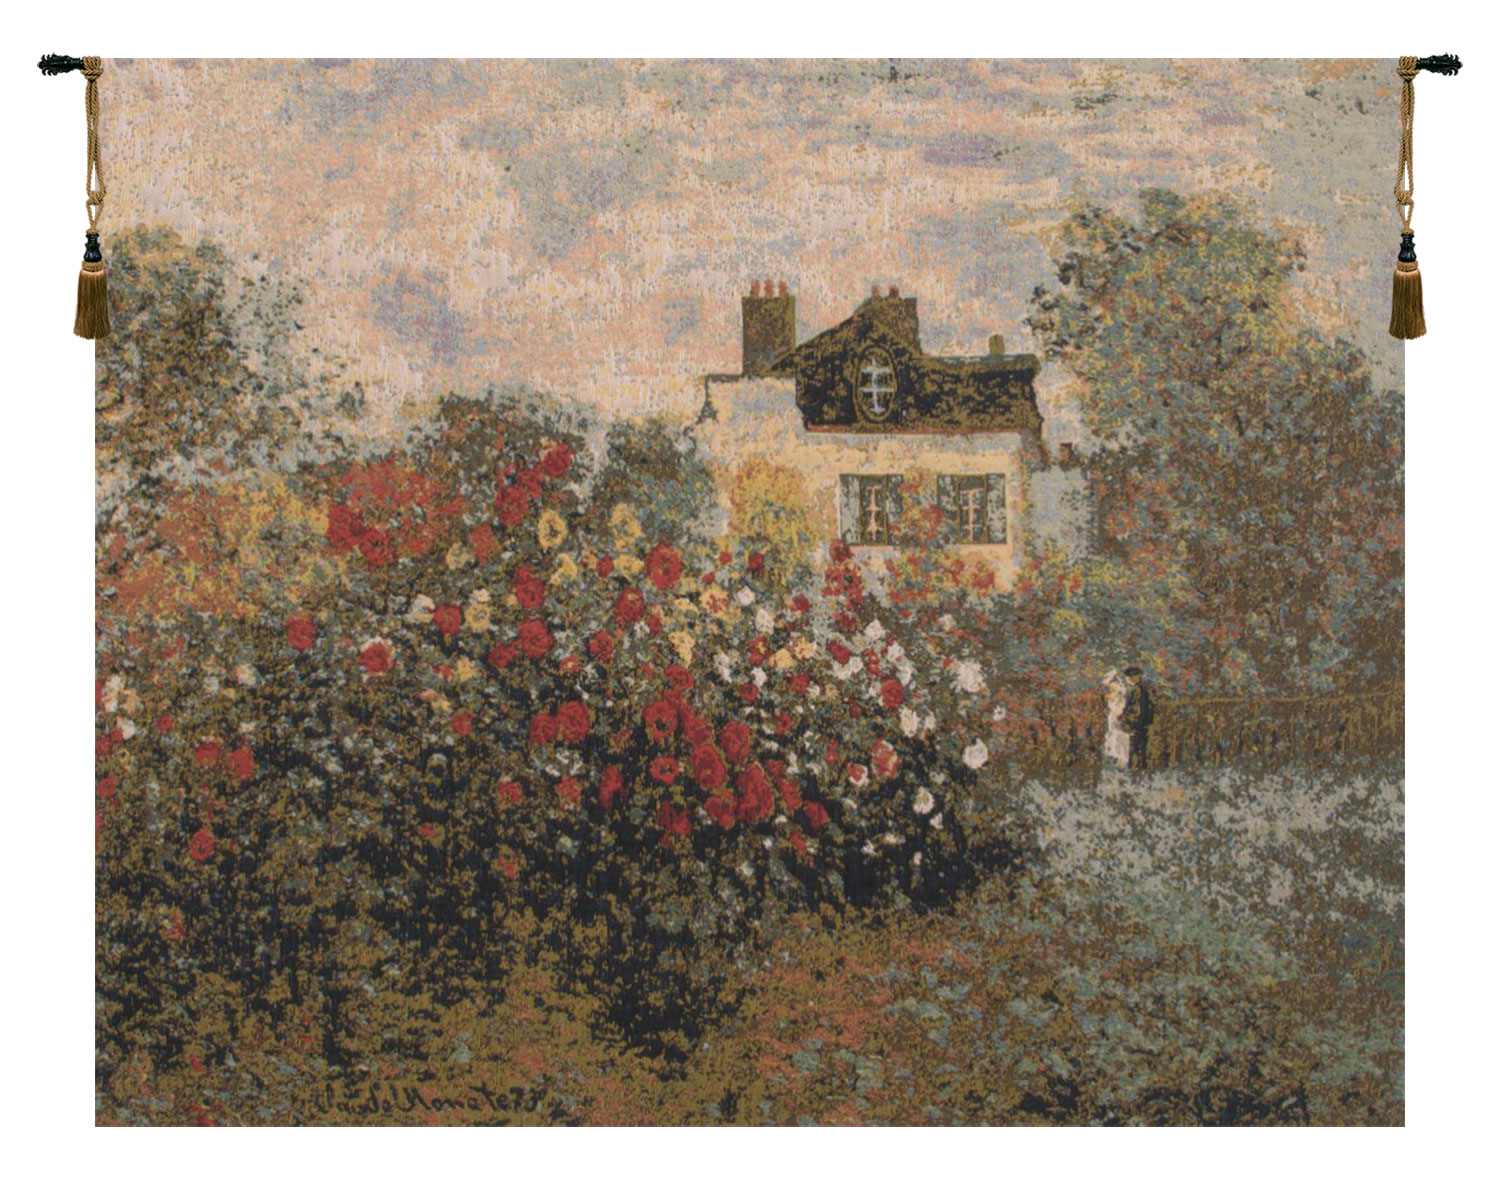 The House Of Claude Monet European Tapestry Wall Art Hanging For Home Decor New